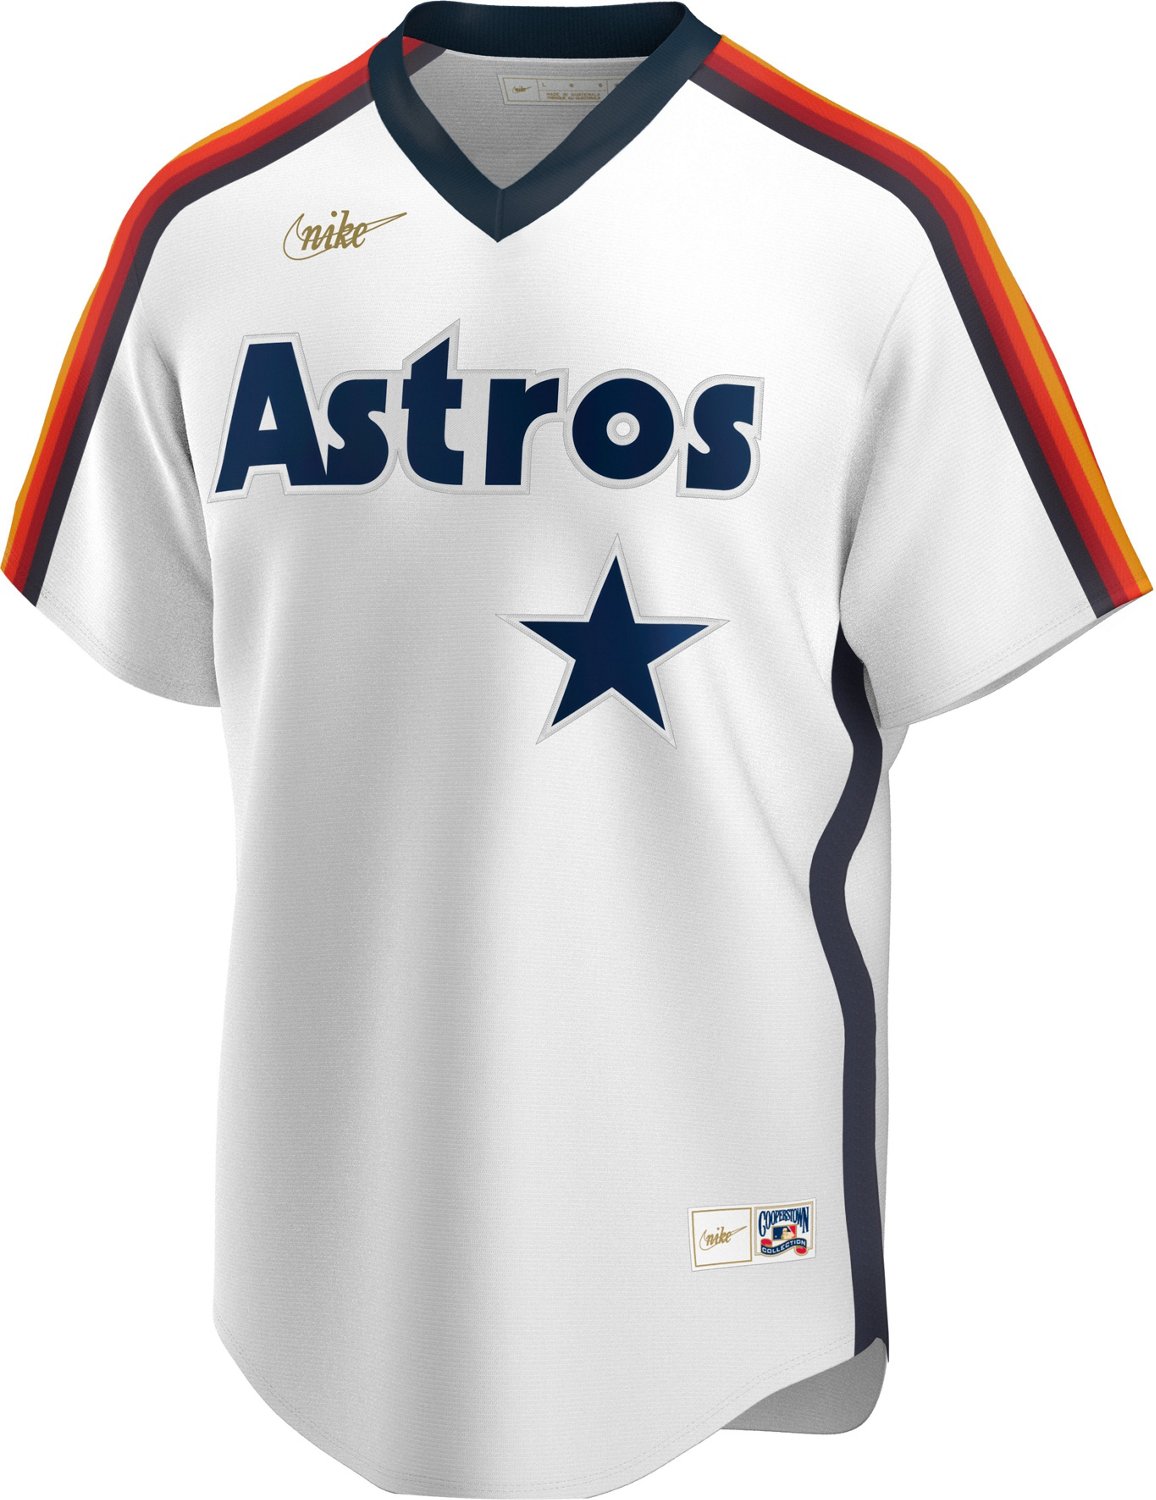 Nike Men's Houston Astros Official 1986 Cooperstown Jersey Academy